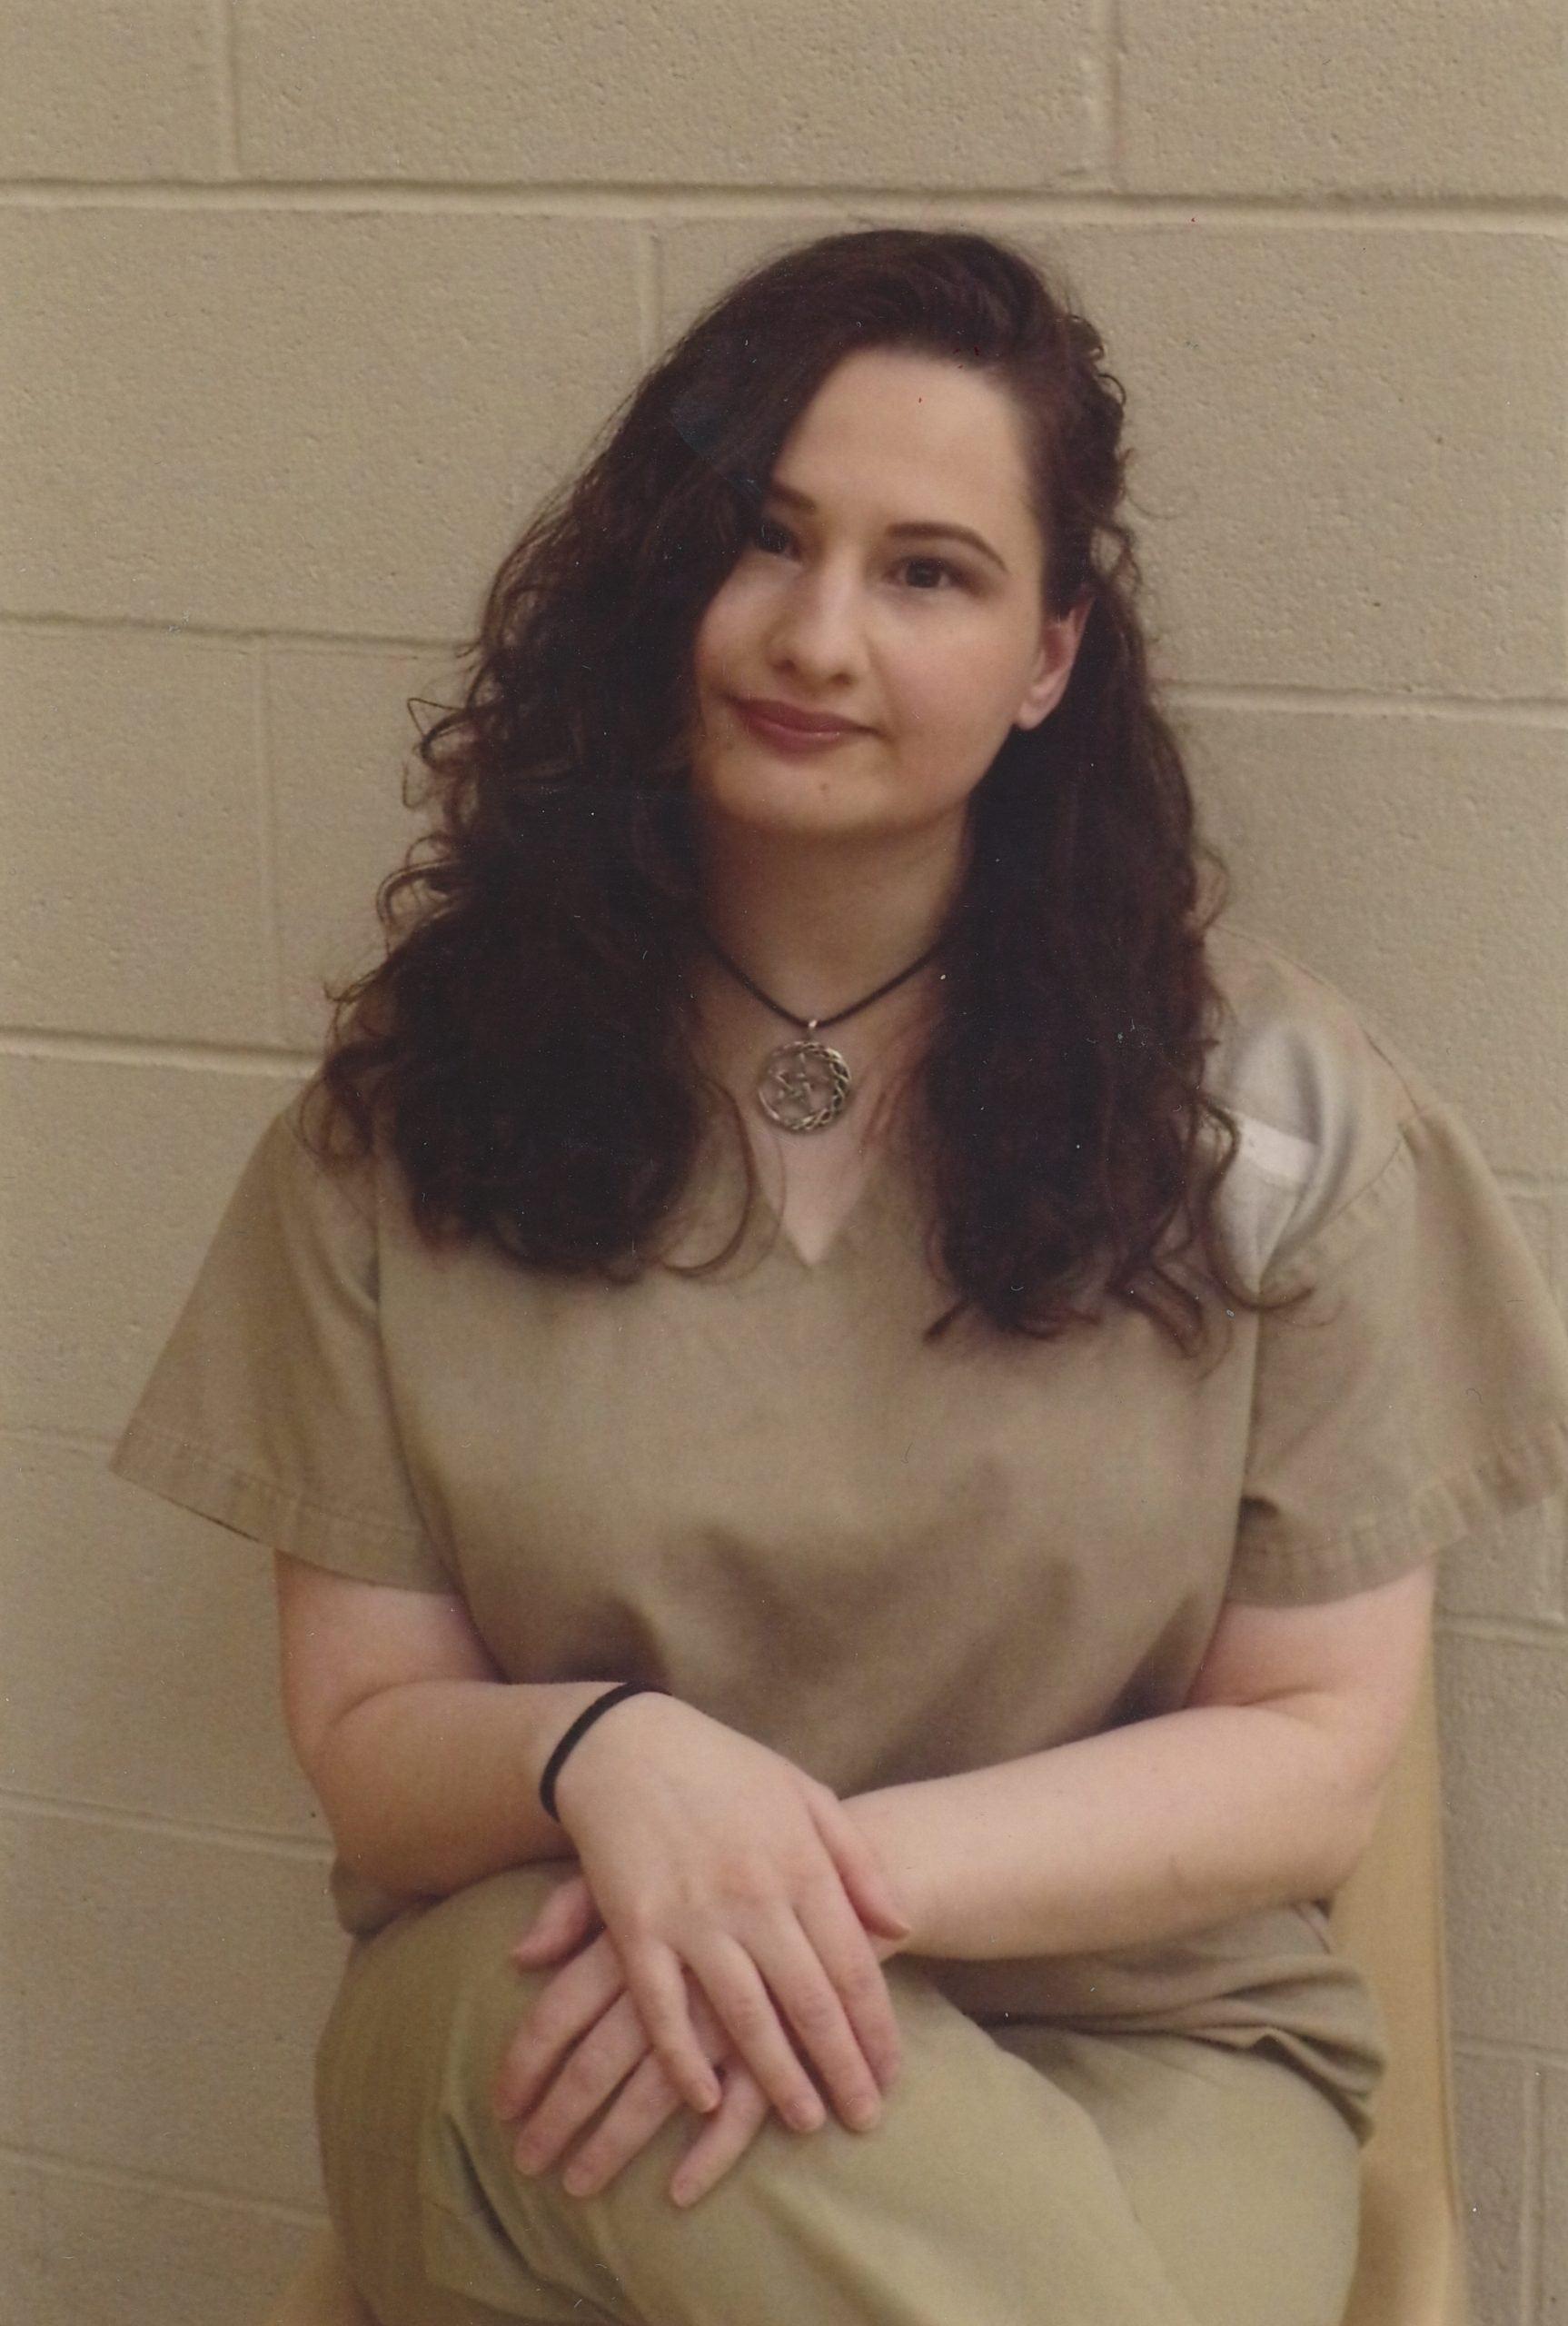 Gypsy Rose Blanchard, shown in prison garb, in an image from Lifetime